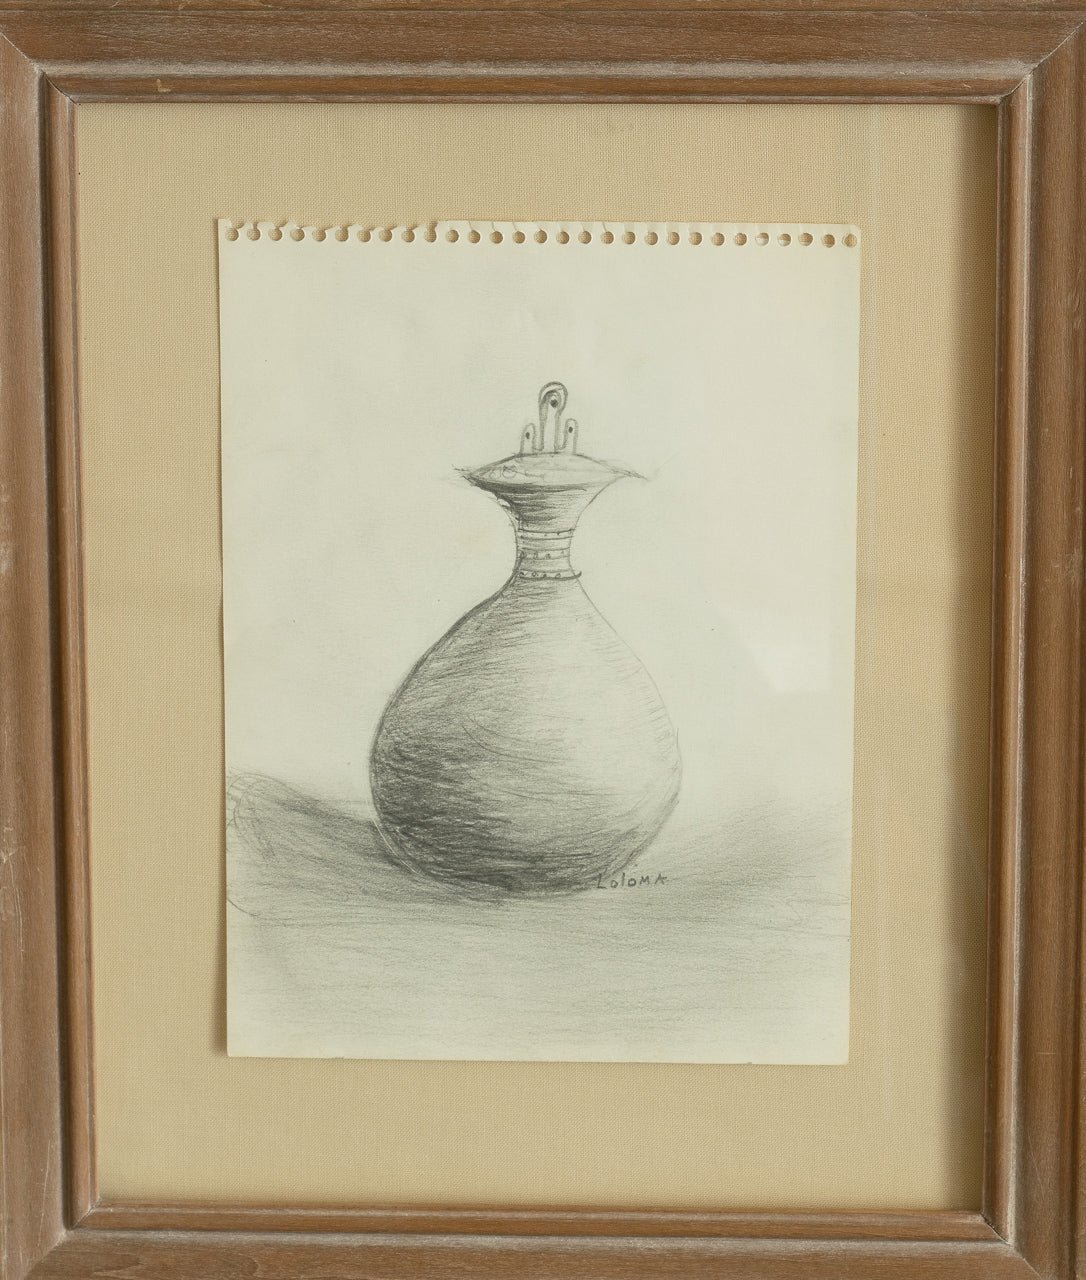 Original Pencil Drawing by Charles Loloma of a Vase - Turquoise & Tufa